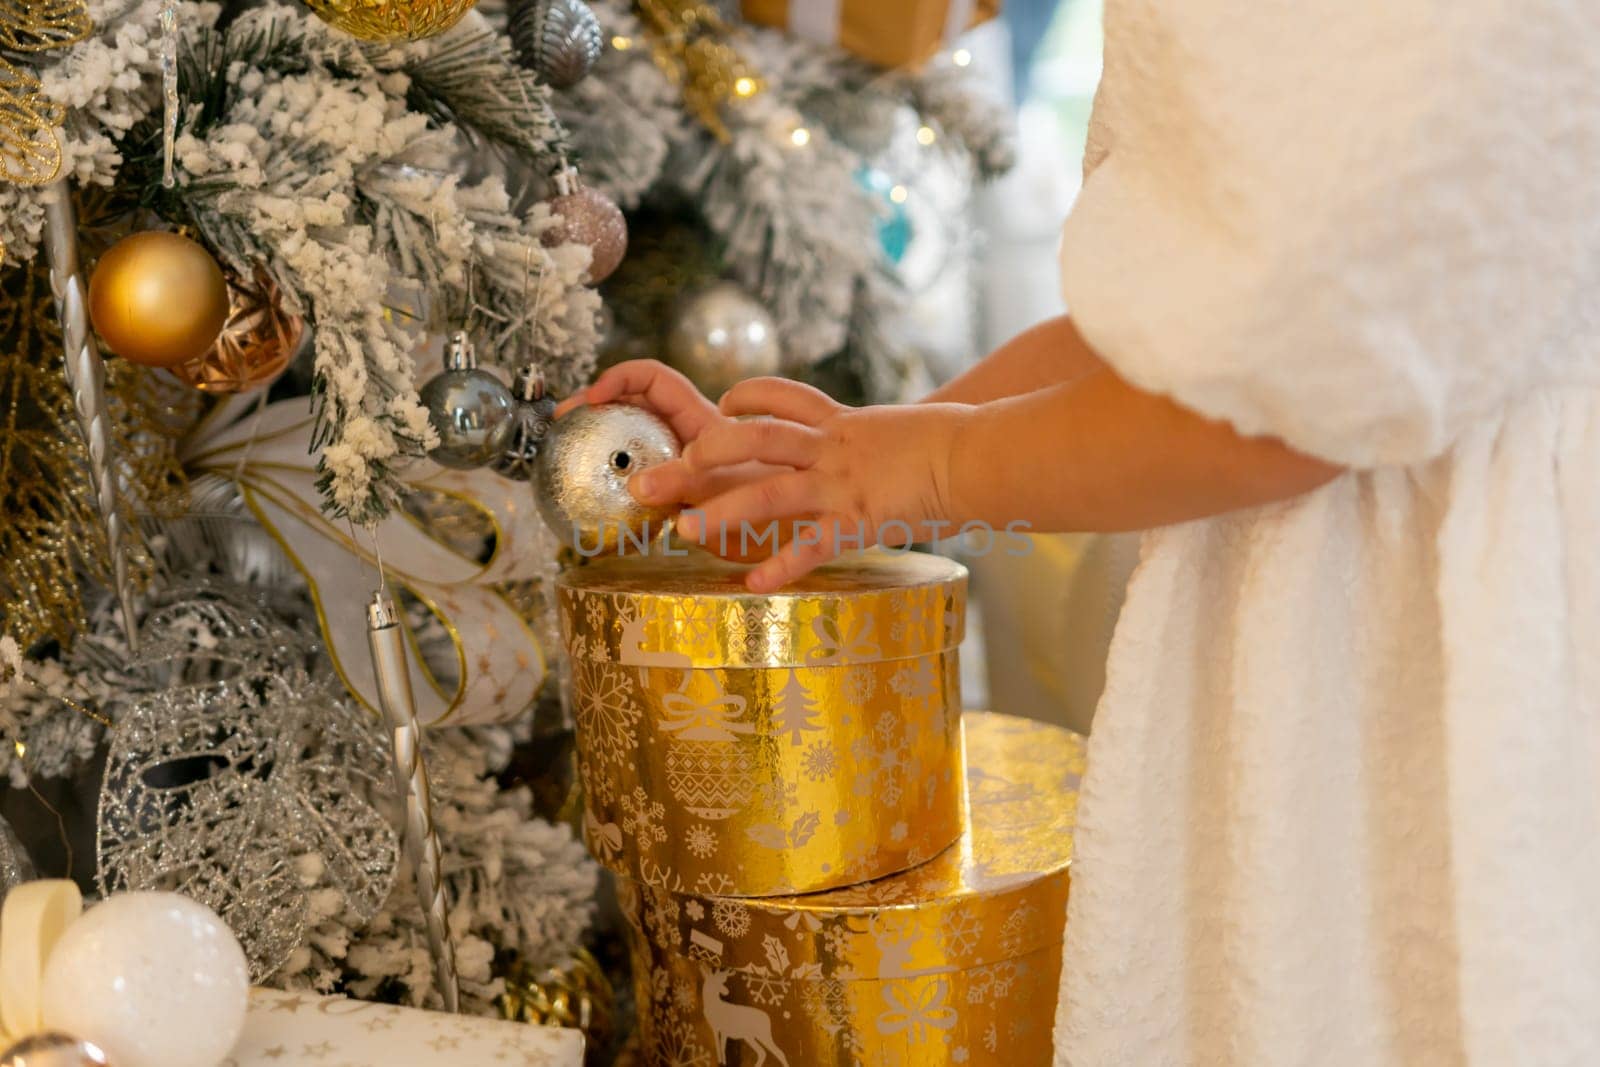 A woman is opening a gold box with a silver ball inside. The box is decorated with gold and silver ornaments, and the woman is wearing a white dress. The scene is set in a room with a Christmas tree. by Matiunina